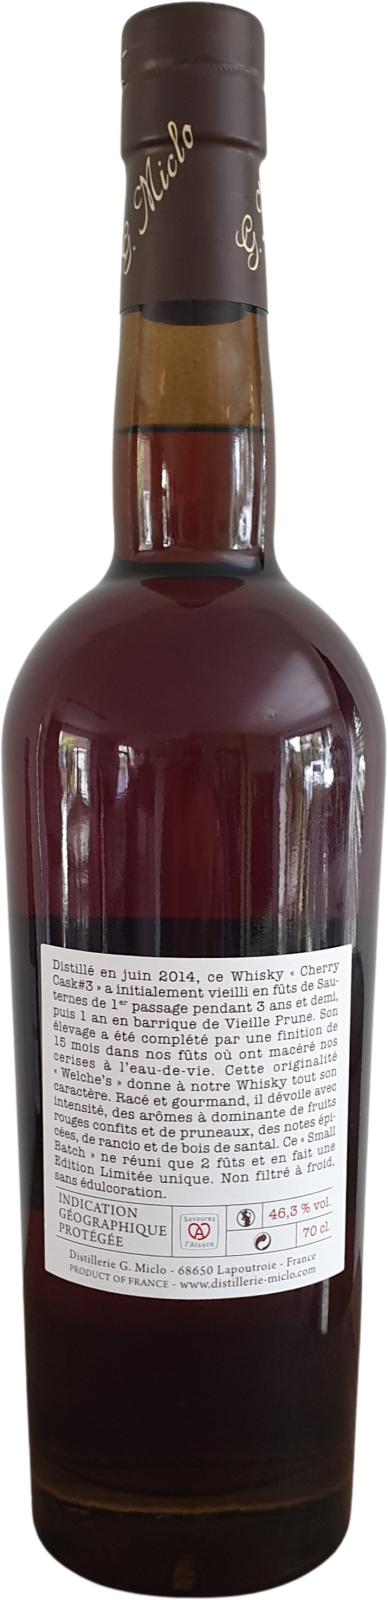 Welche's Whisky 2014